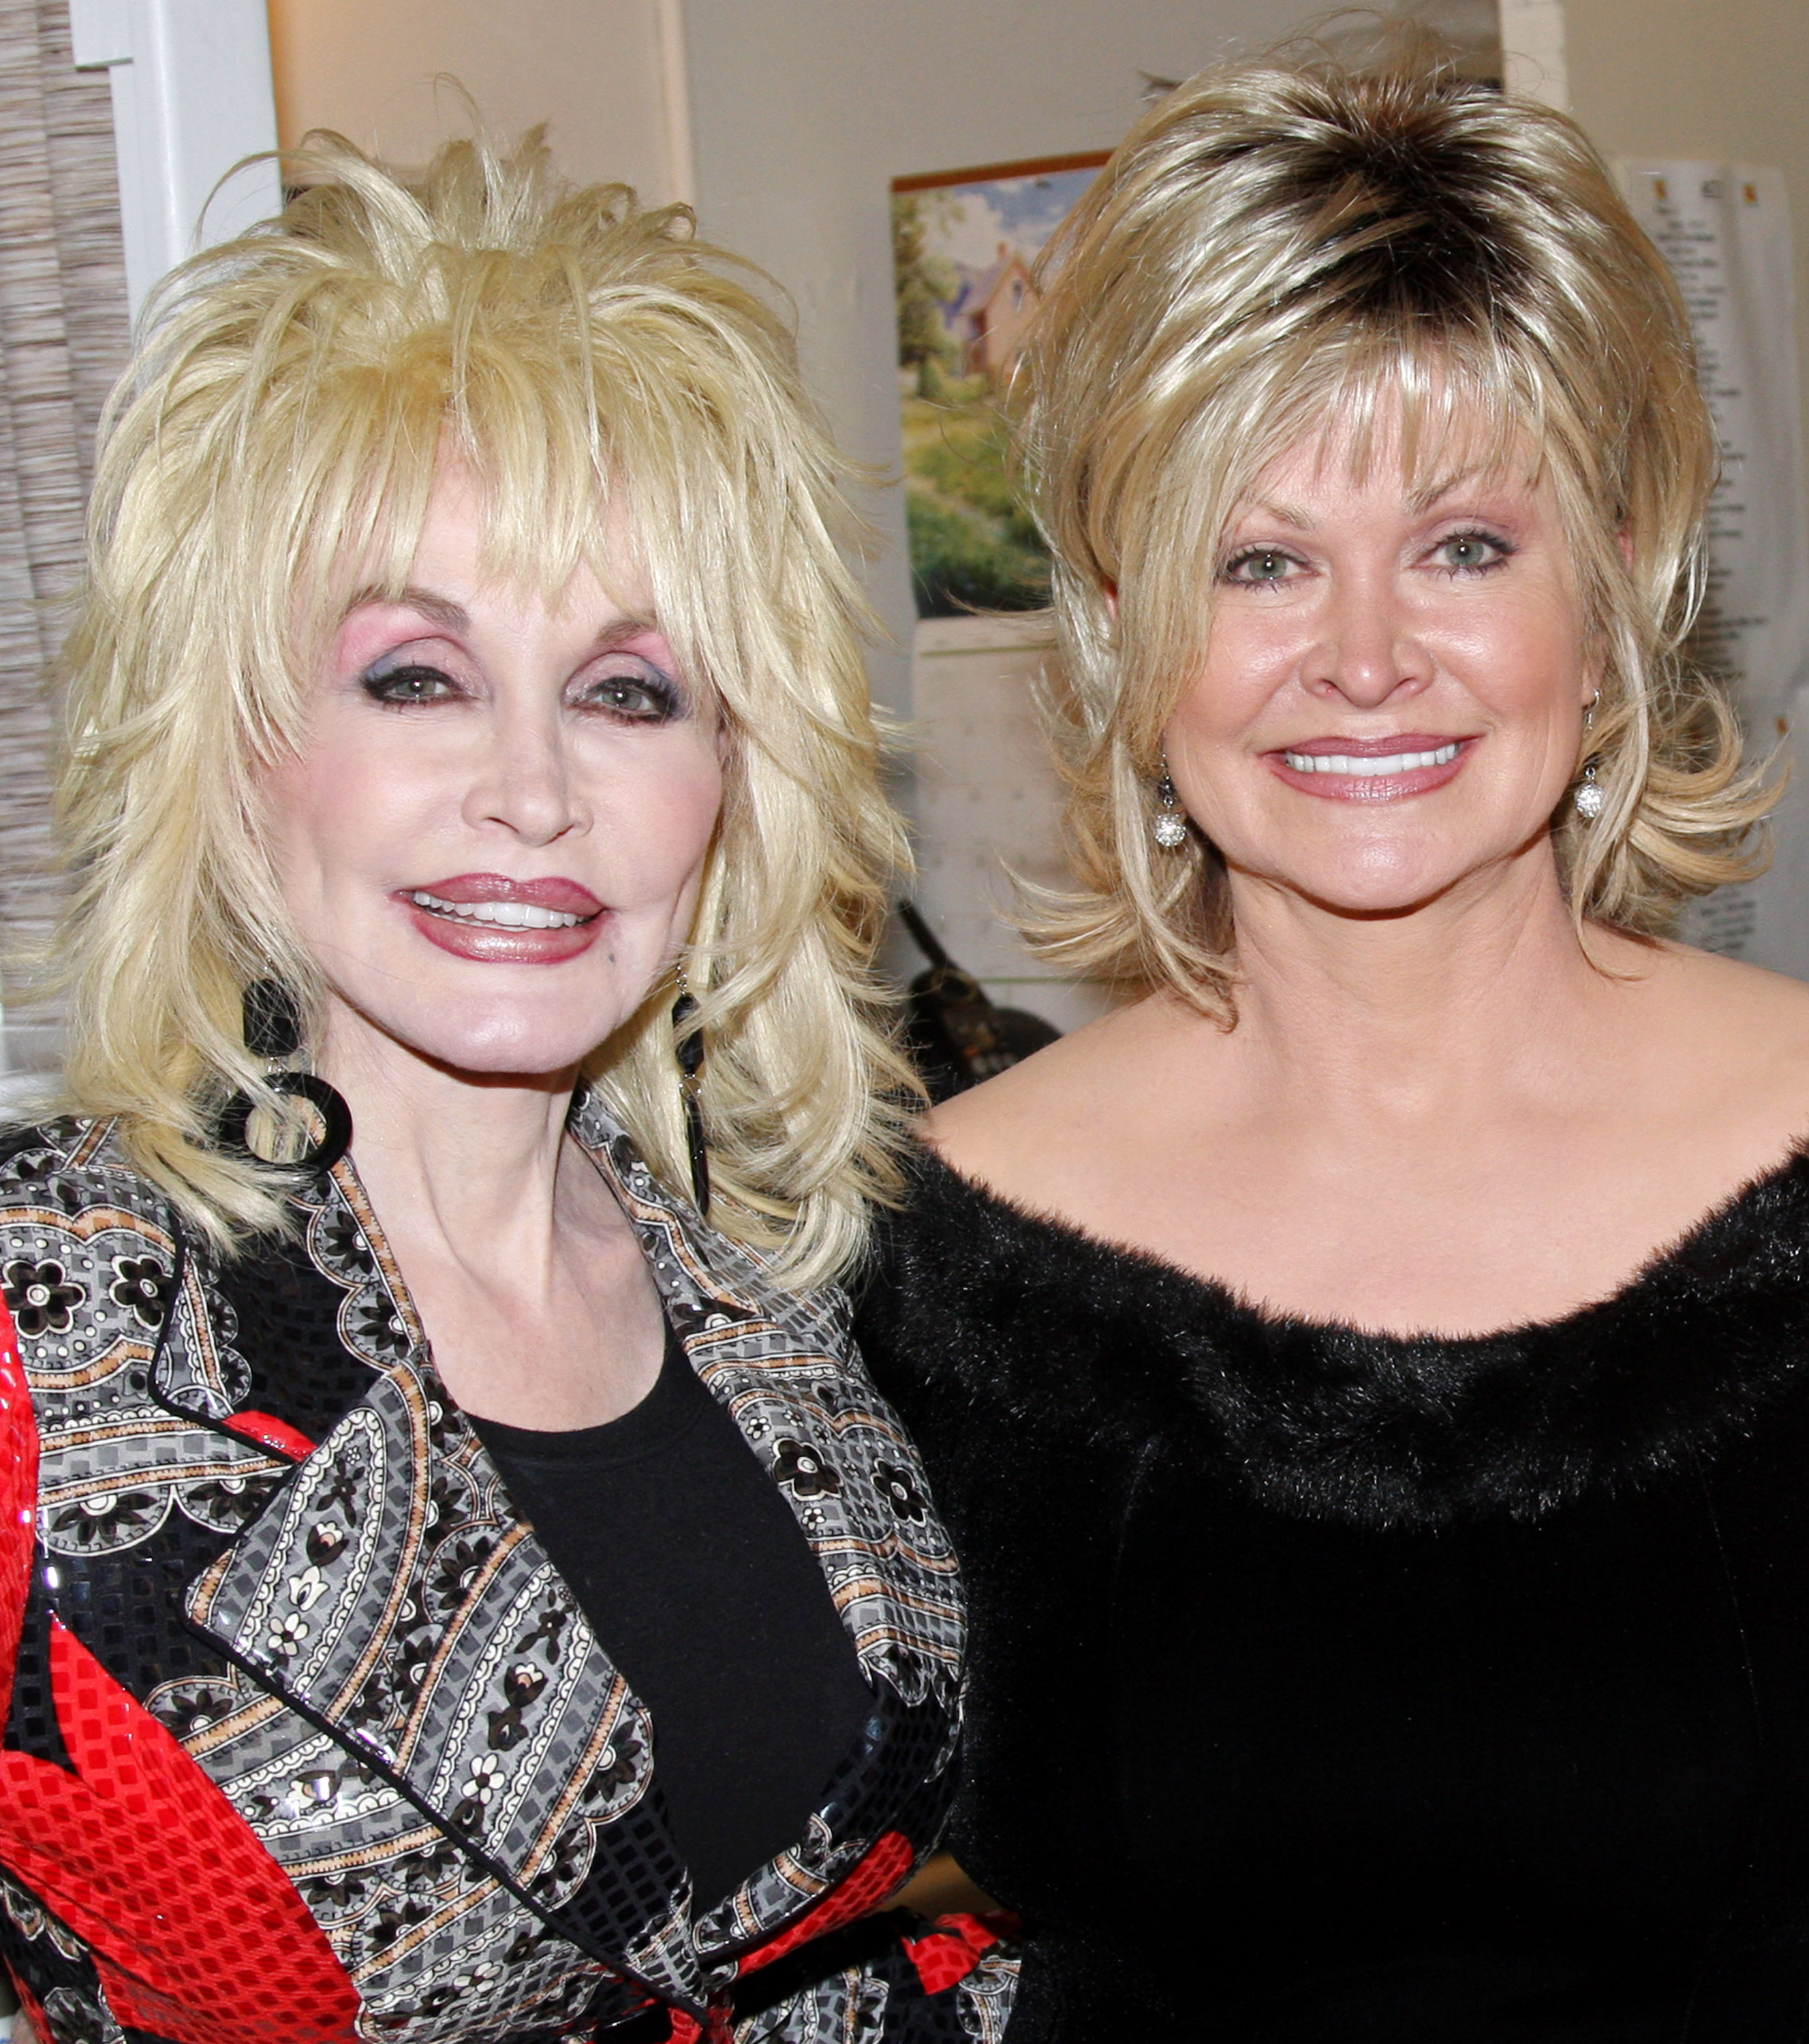 Dolly Parton and her sister Rachel Parton Dennison (the film and tv series "Doralee's") pose backstage at the hit new musical "9 to 5" on Broadway at The Marquis Theatre on April 13, 2009, in New York City. | Source: Getty Images